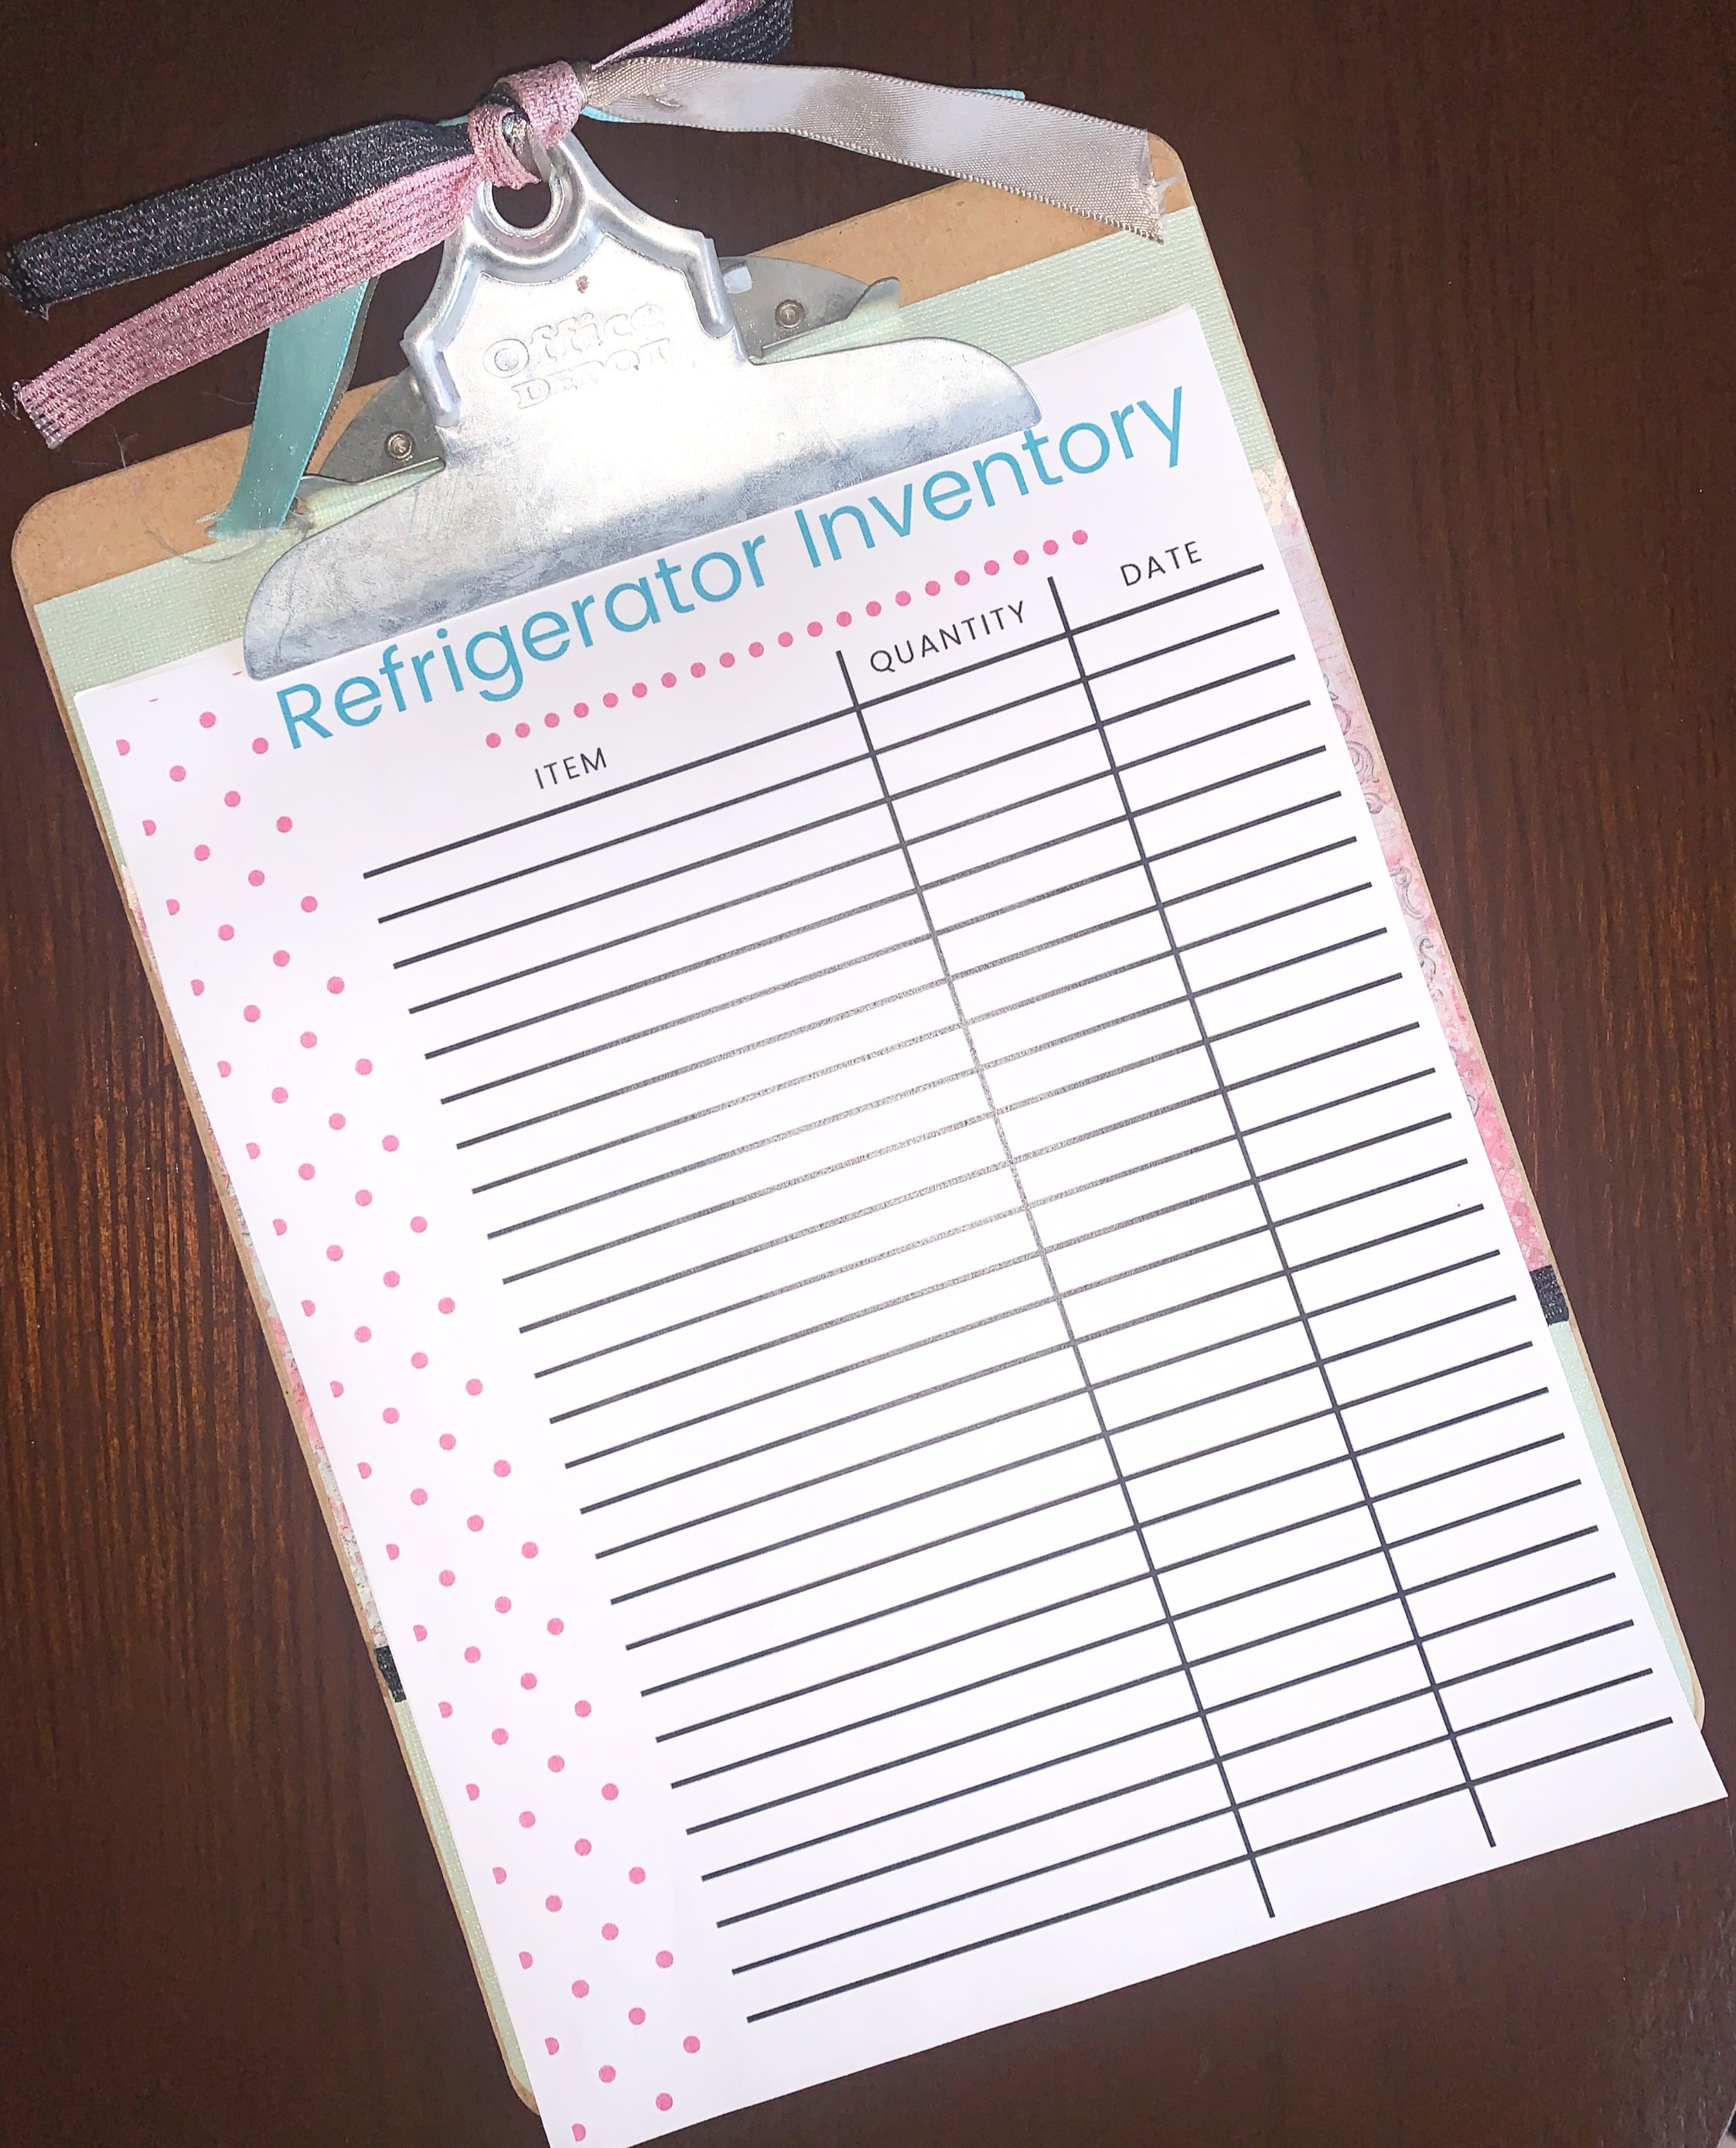 Printable refrigerator inventory on a clipboard